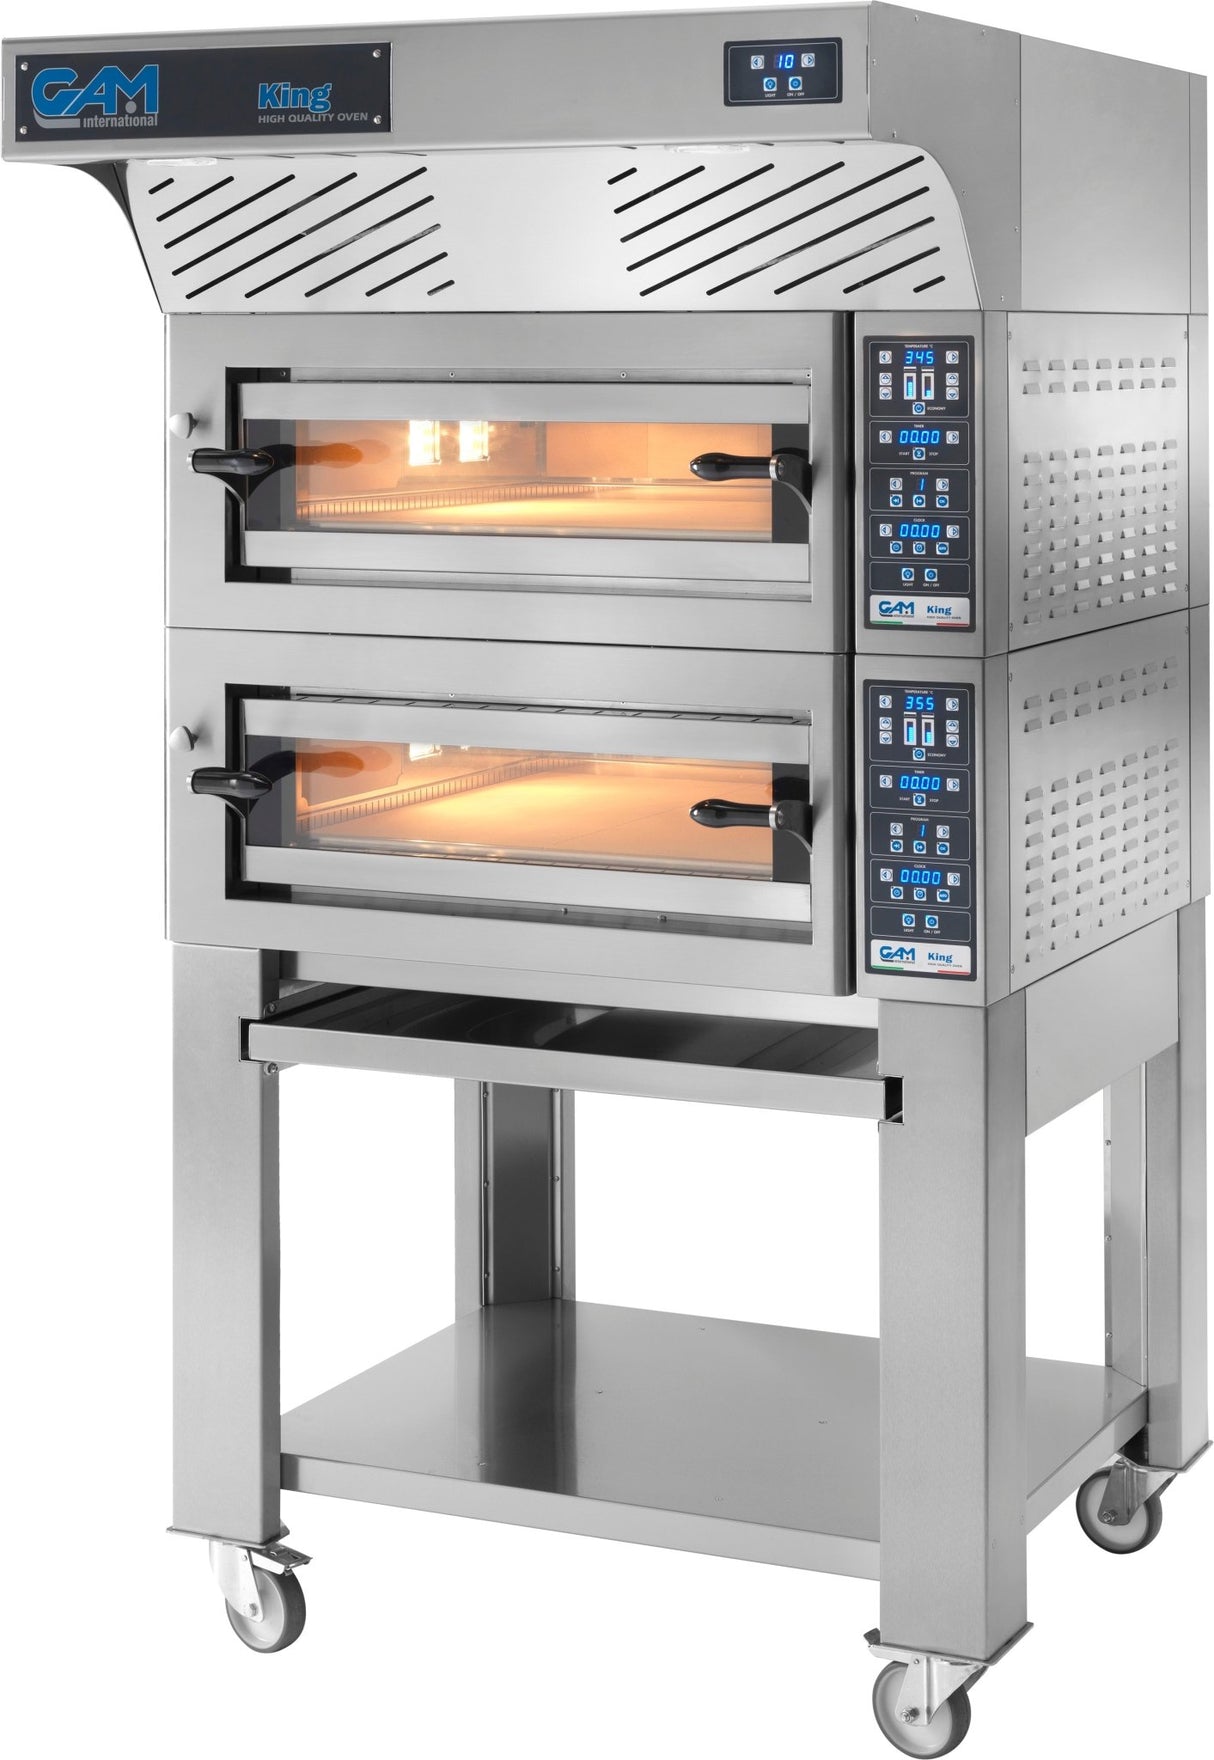 KING 9 Stone Deck Pizza / Bakery Oven - 9 x 34cm pizzas